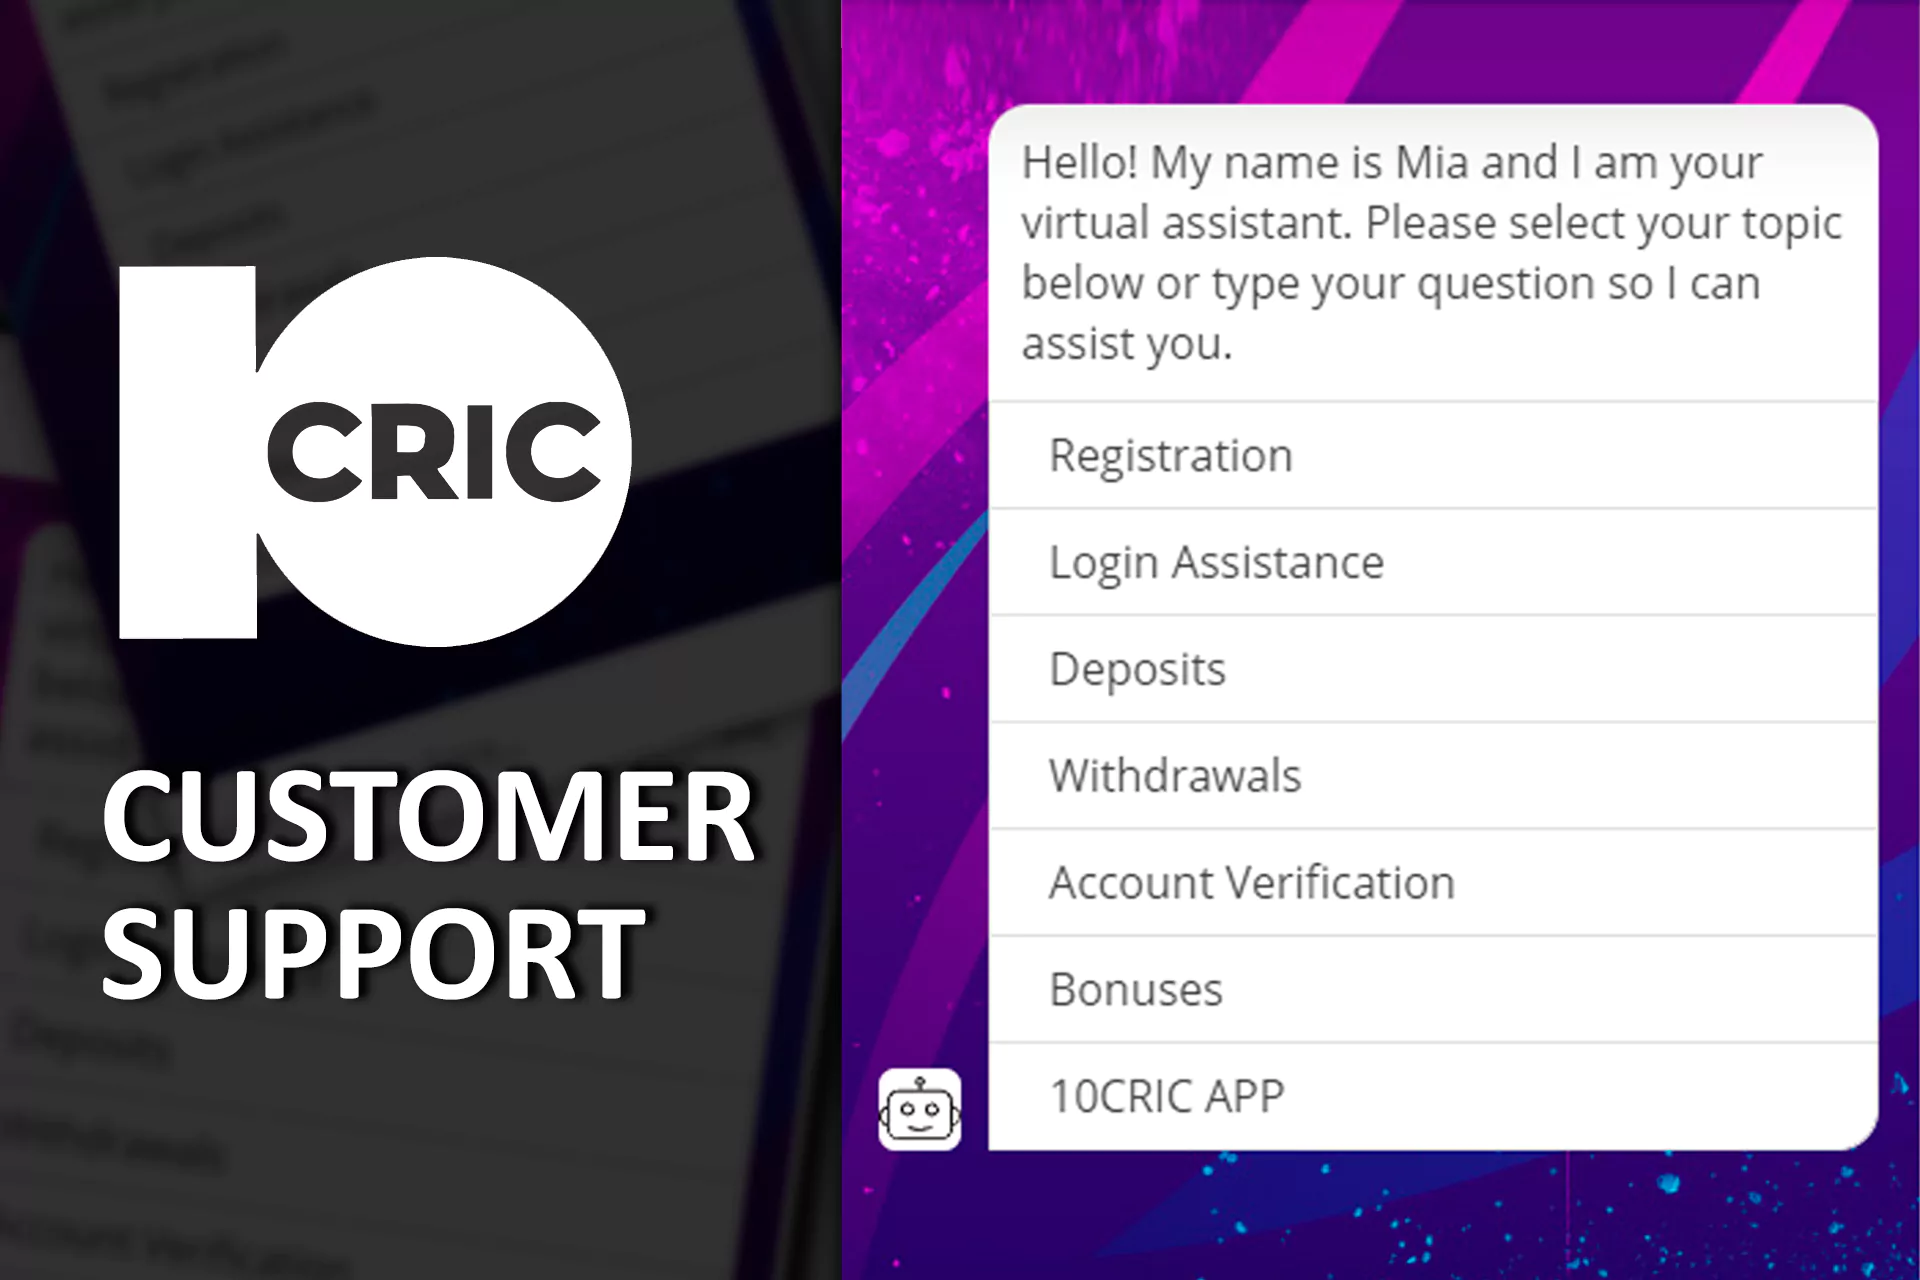 10Cric customer support is available 24 hours a day, 7 days a week.